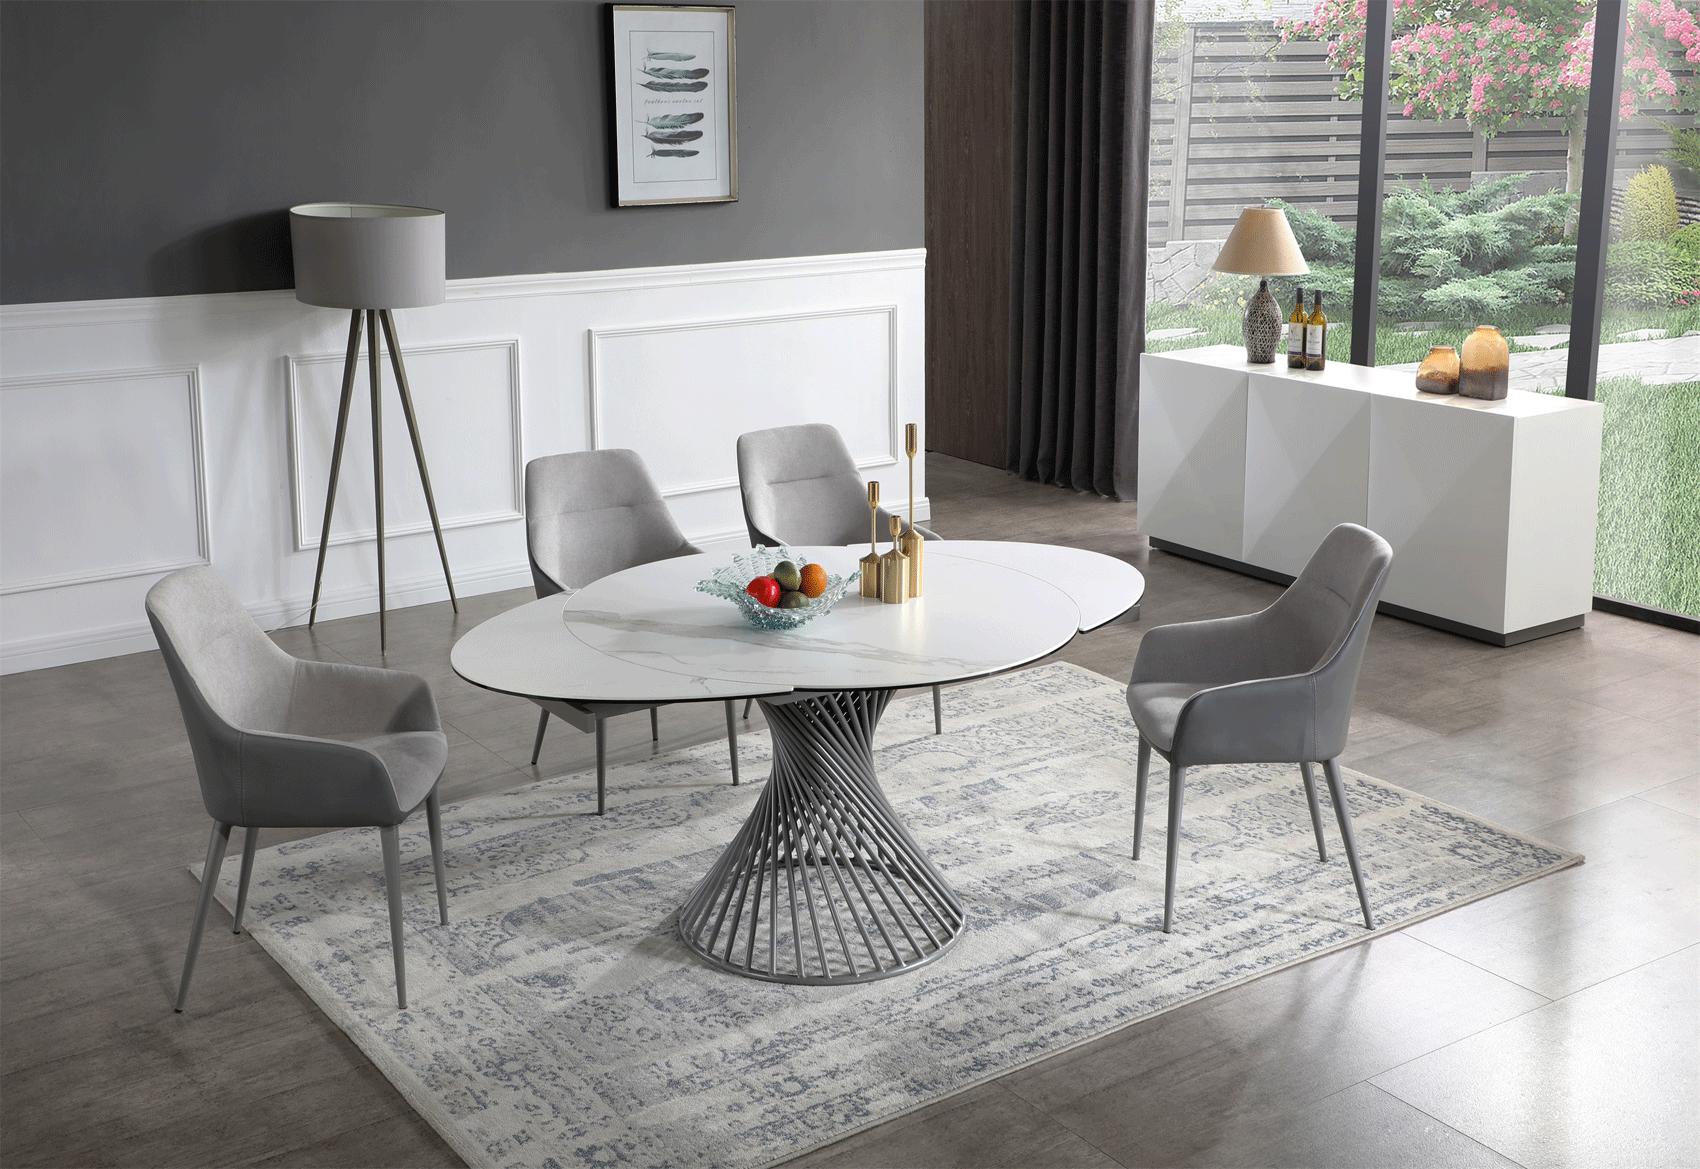 Contemporary Dining Table Set 9034DININGTABLE 9034DININGTABLE-5PC in White, Gray Fabric